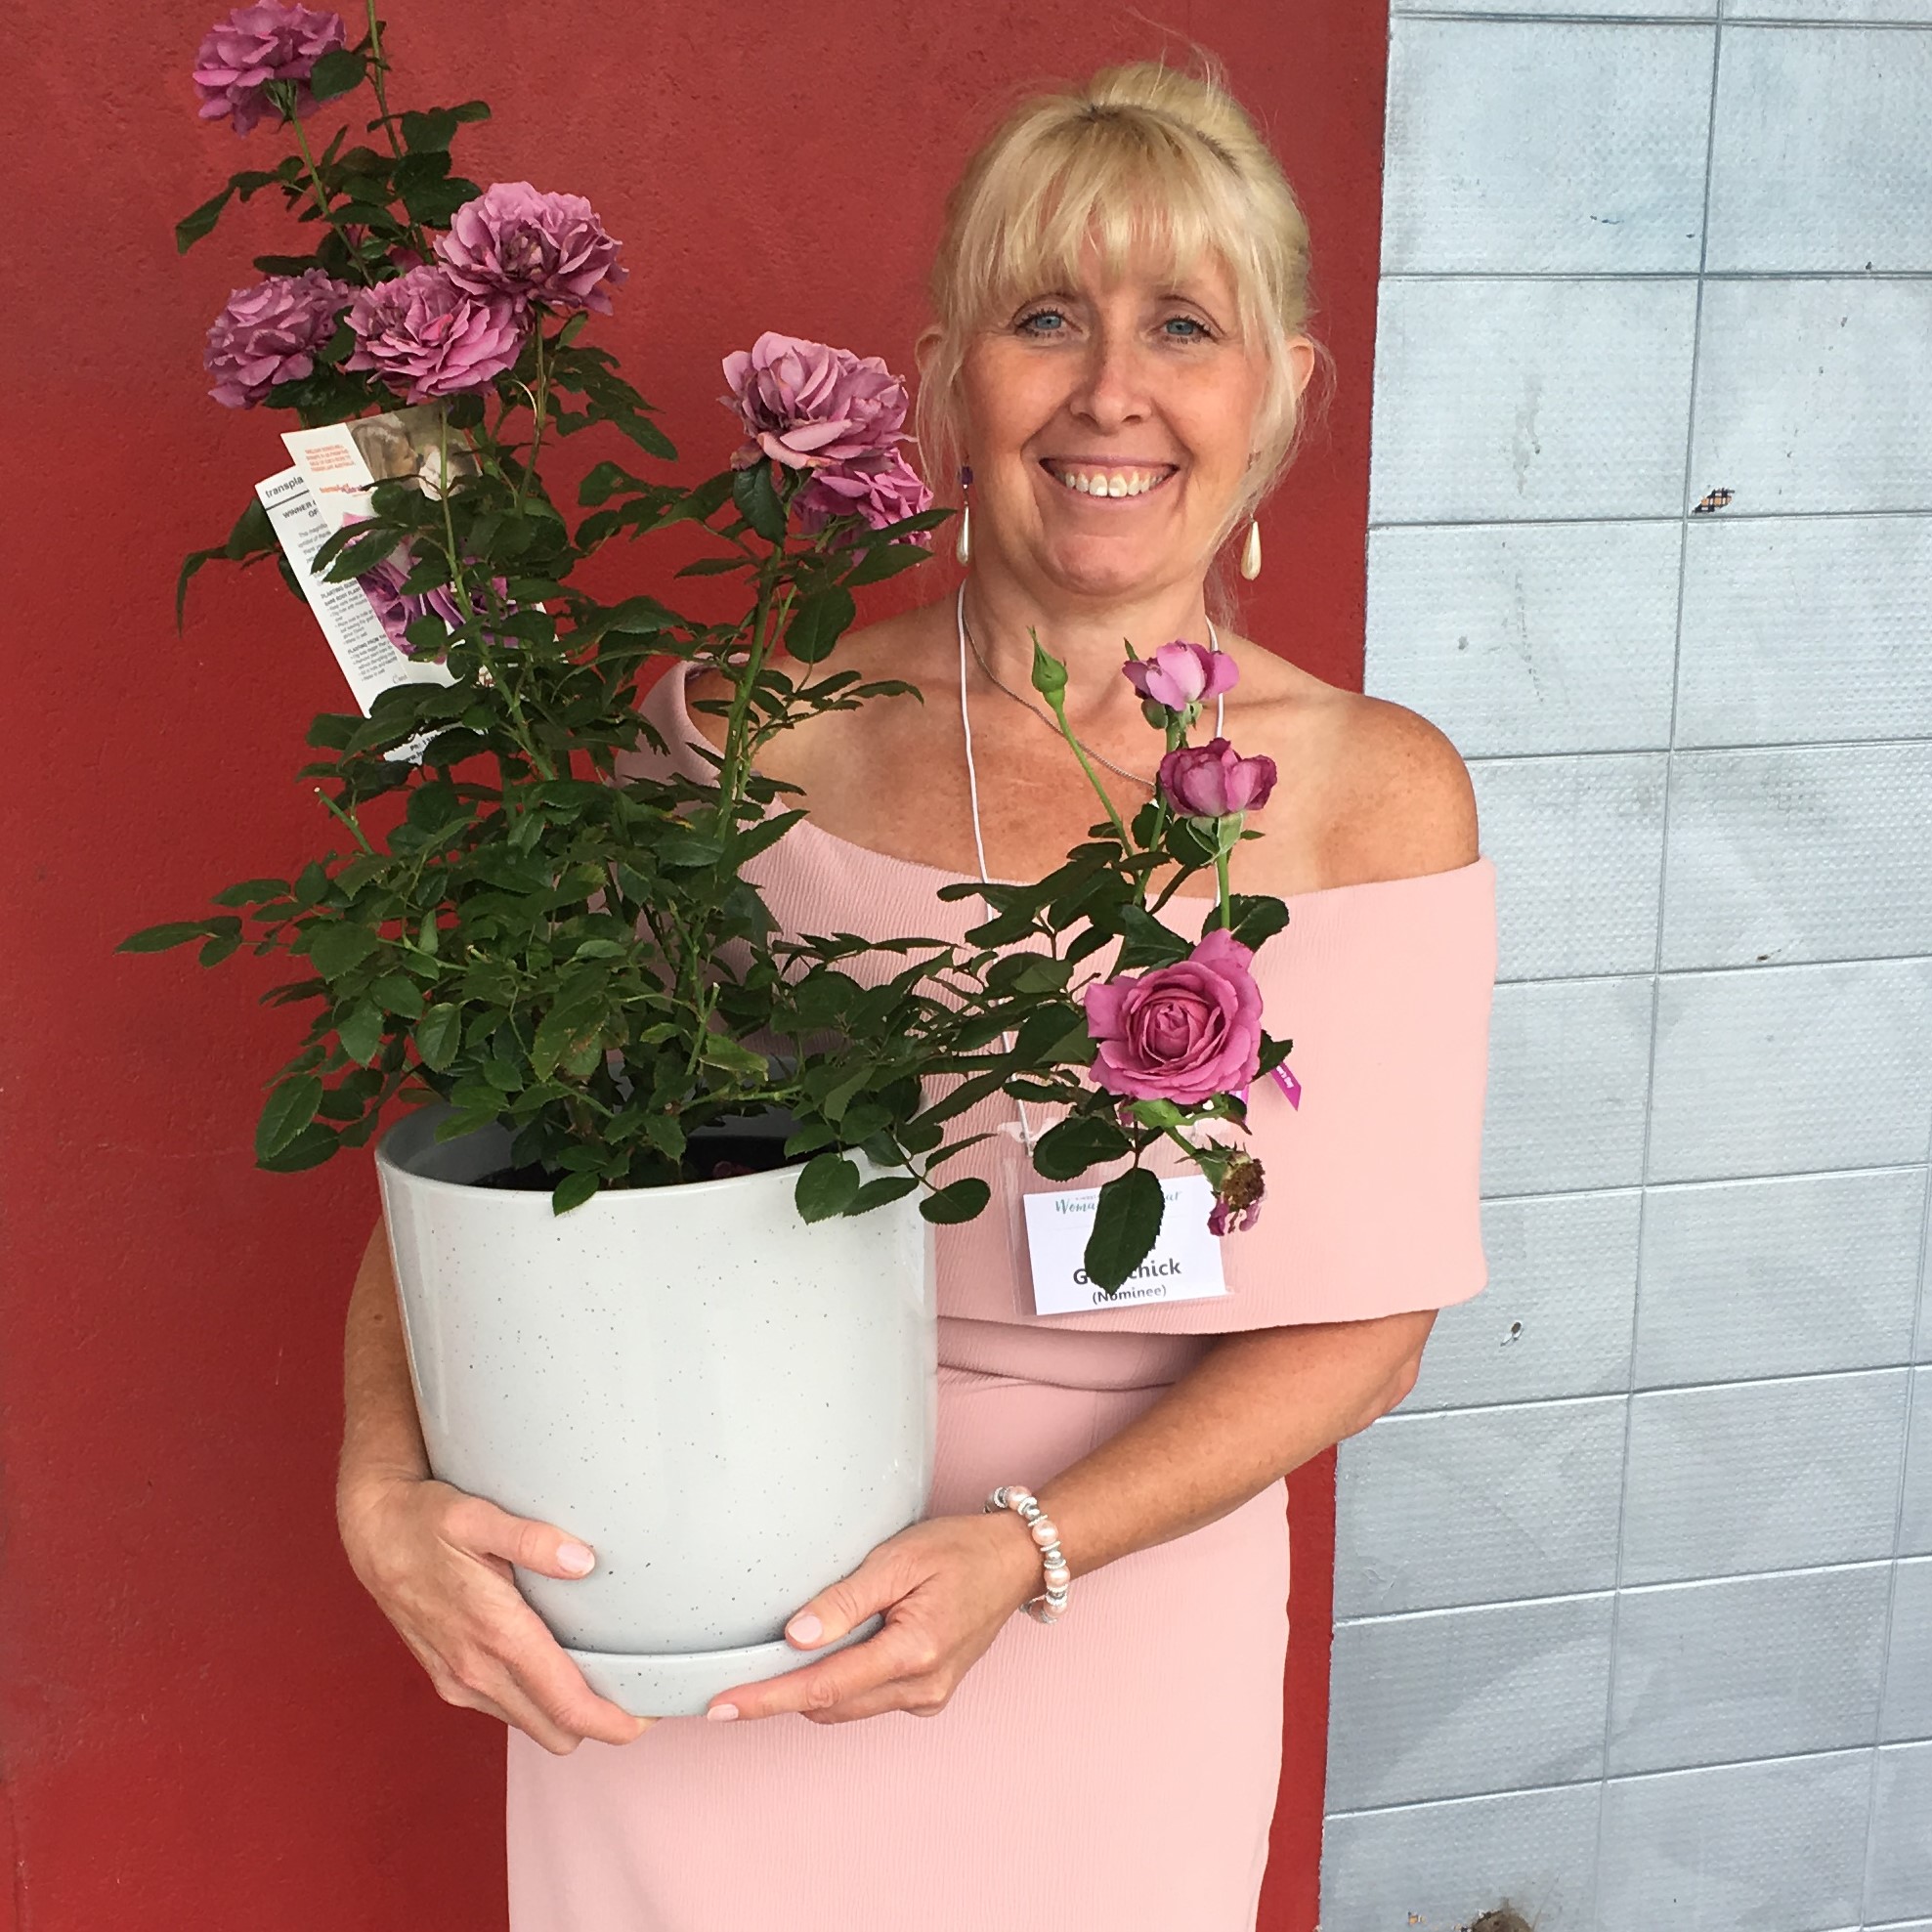 A well dressed woman is holding a potted rose